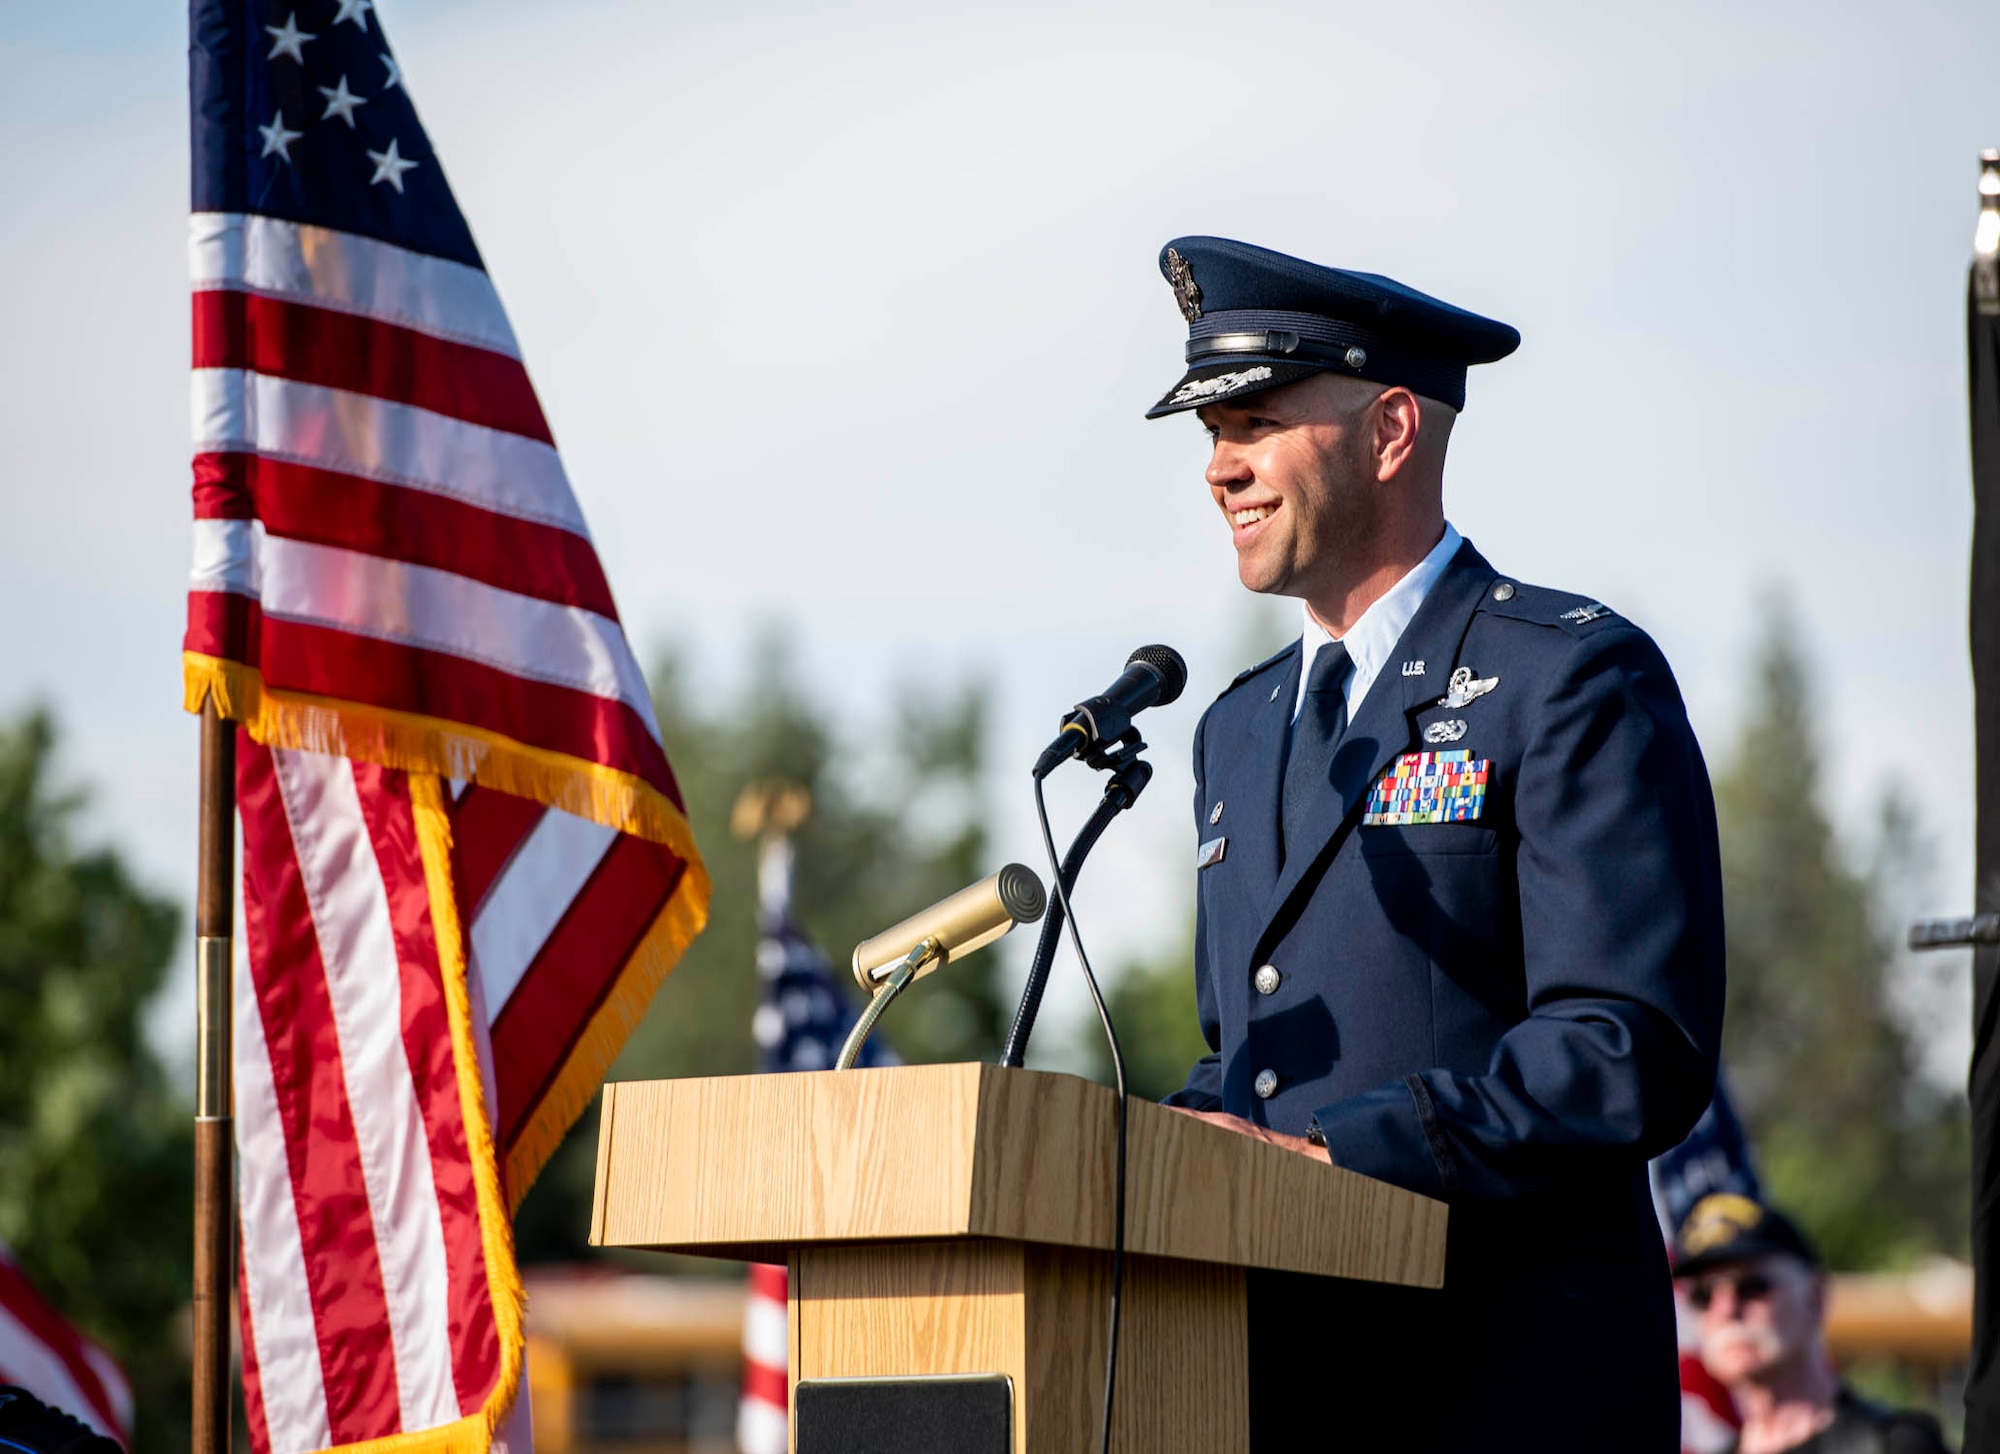 Col. Larry Gardner, commander of the 141st Air Refueling Wing, addresses attendees during the opening ceremony for “The Moving Wall,” a half-size replica of the Vietnam Memorial that stands in Washington D.C., June 13, 2019 in Medical Lake, Wash. The Moving Wall travels throughout the country to bring the experience of visiting the memorial to those who may not have the opportunity to travel to the nation’s capital. The display will be in Medical Lake June 13-17 at the 200 block of South Prentis St. (U.S. Air National Guard photo by Staff Sgt. Rose M. Lust/Released)